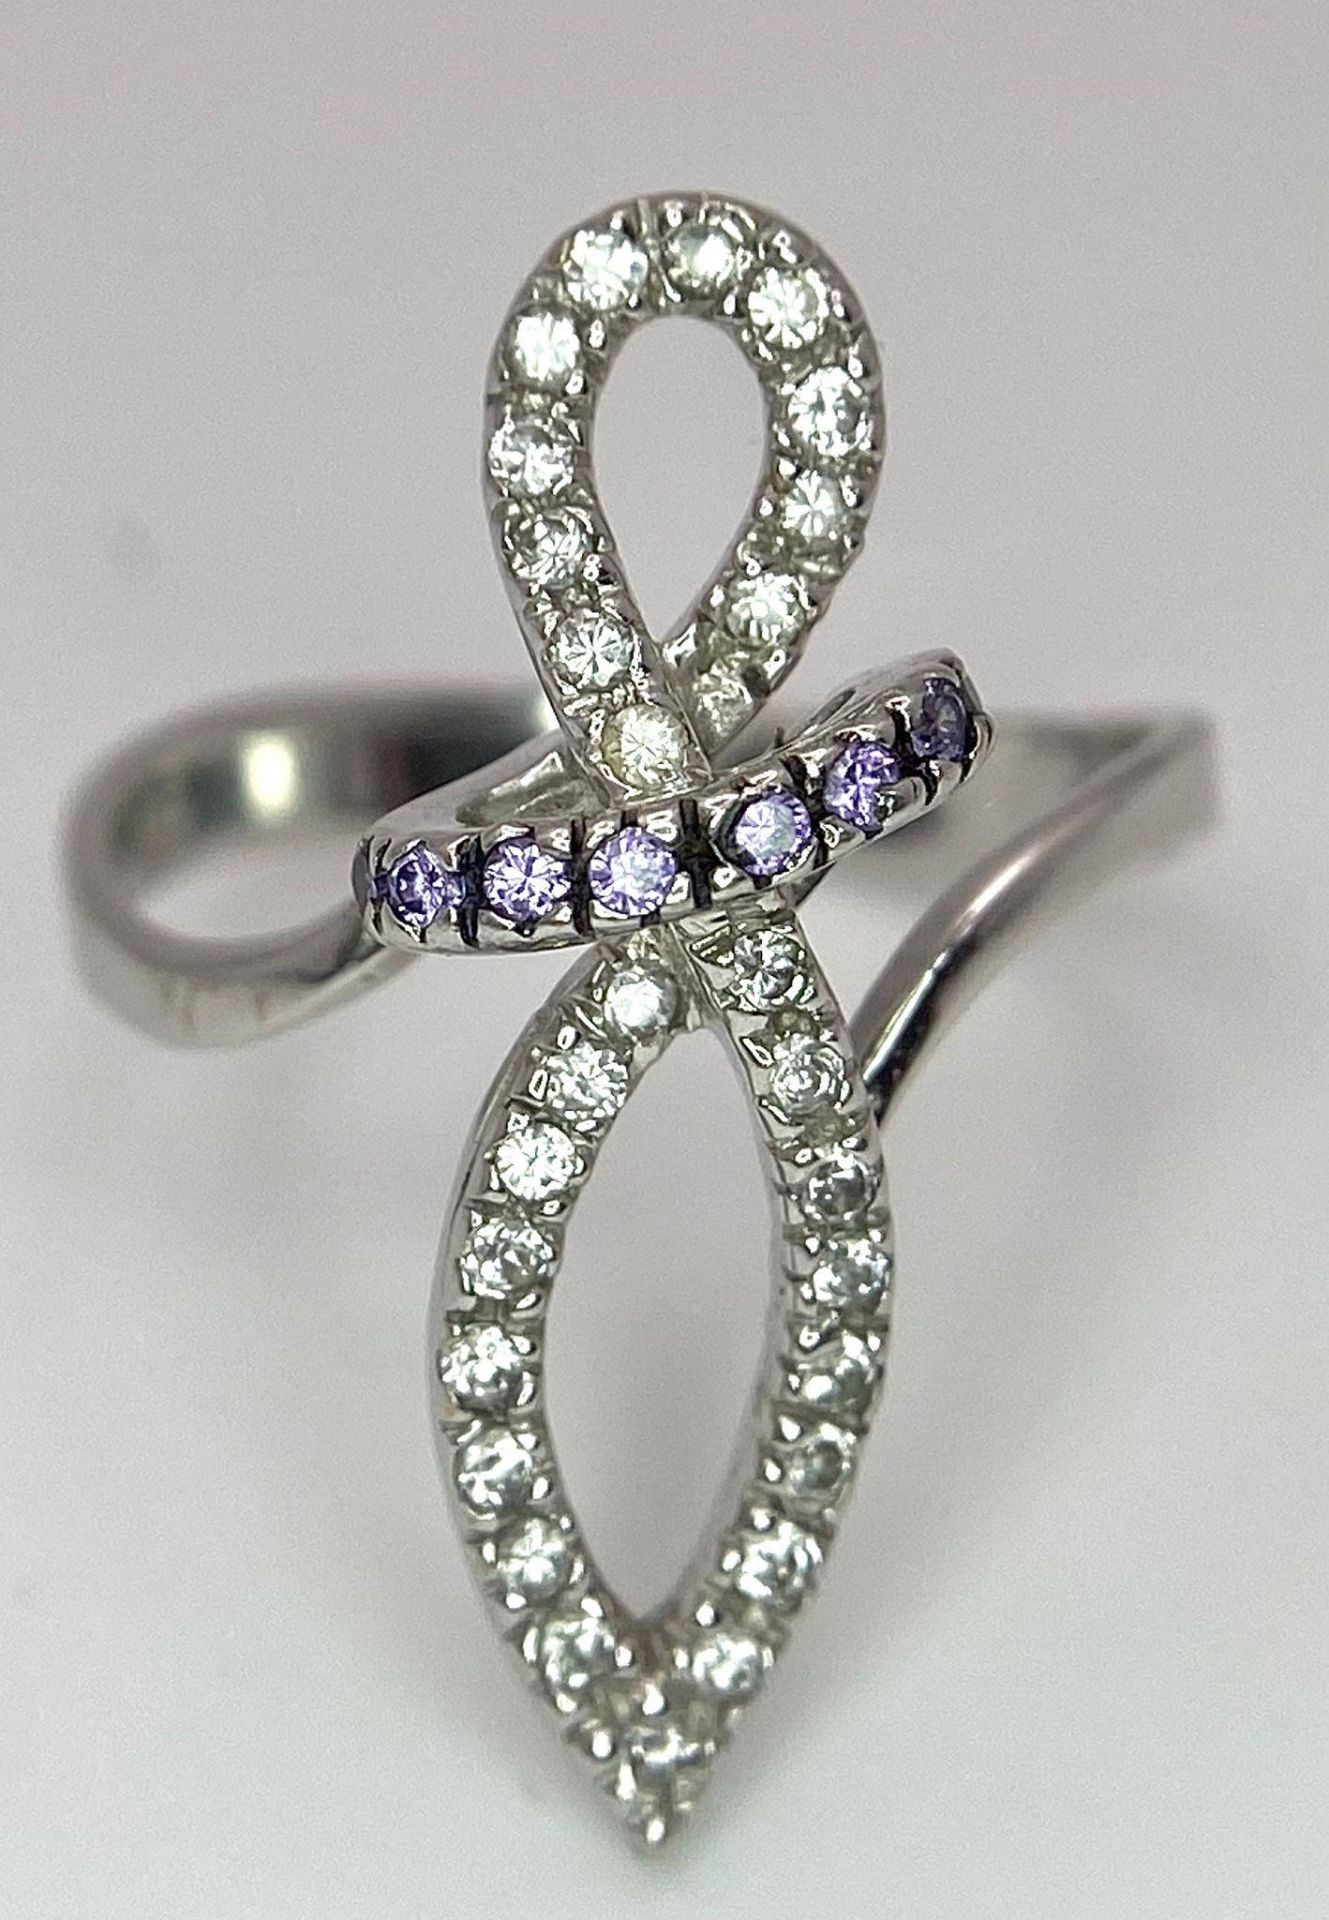 An 18K White Gold CZ Fancy Knot Ring. Size O. 3.9g weight. - Image 5 of 7